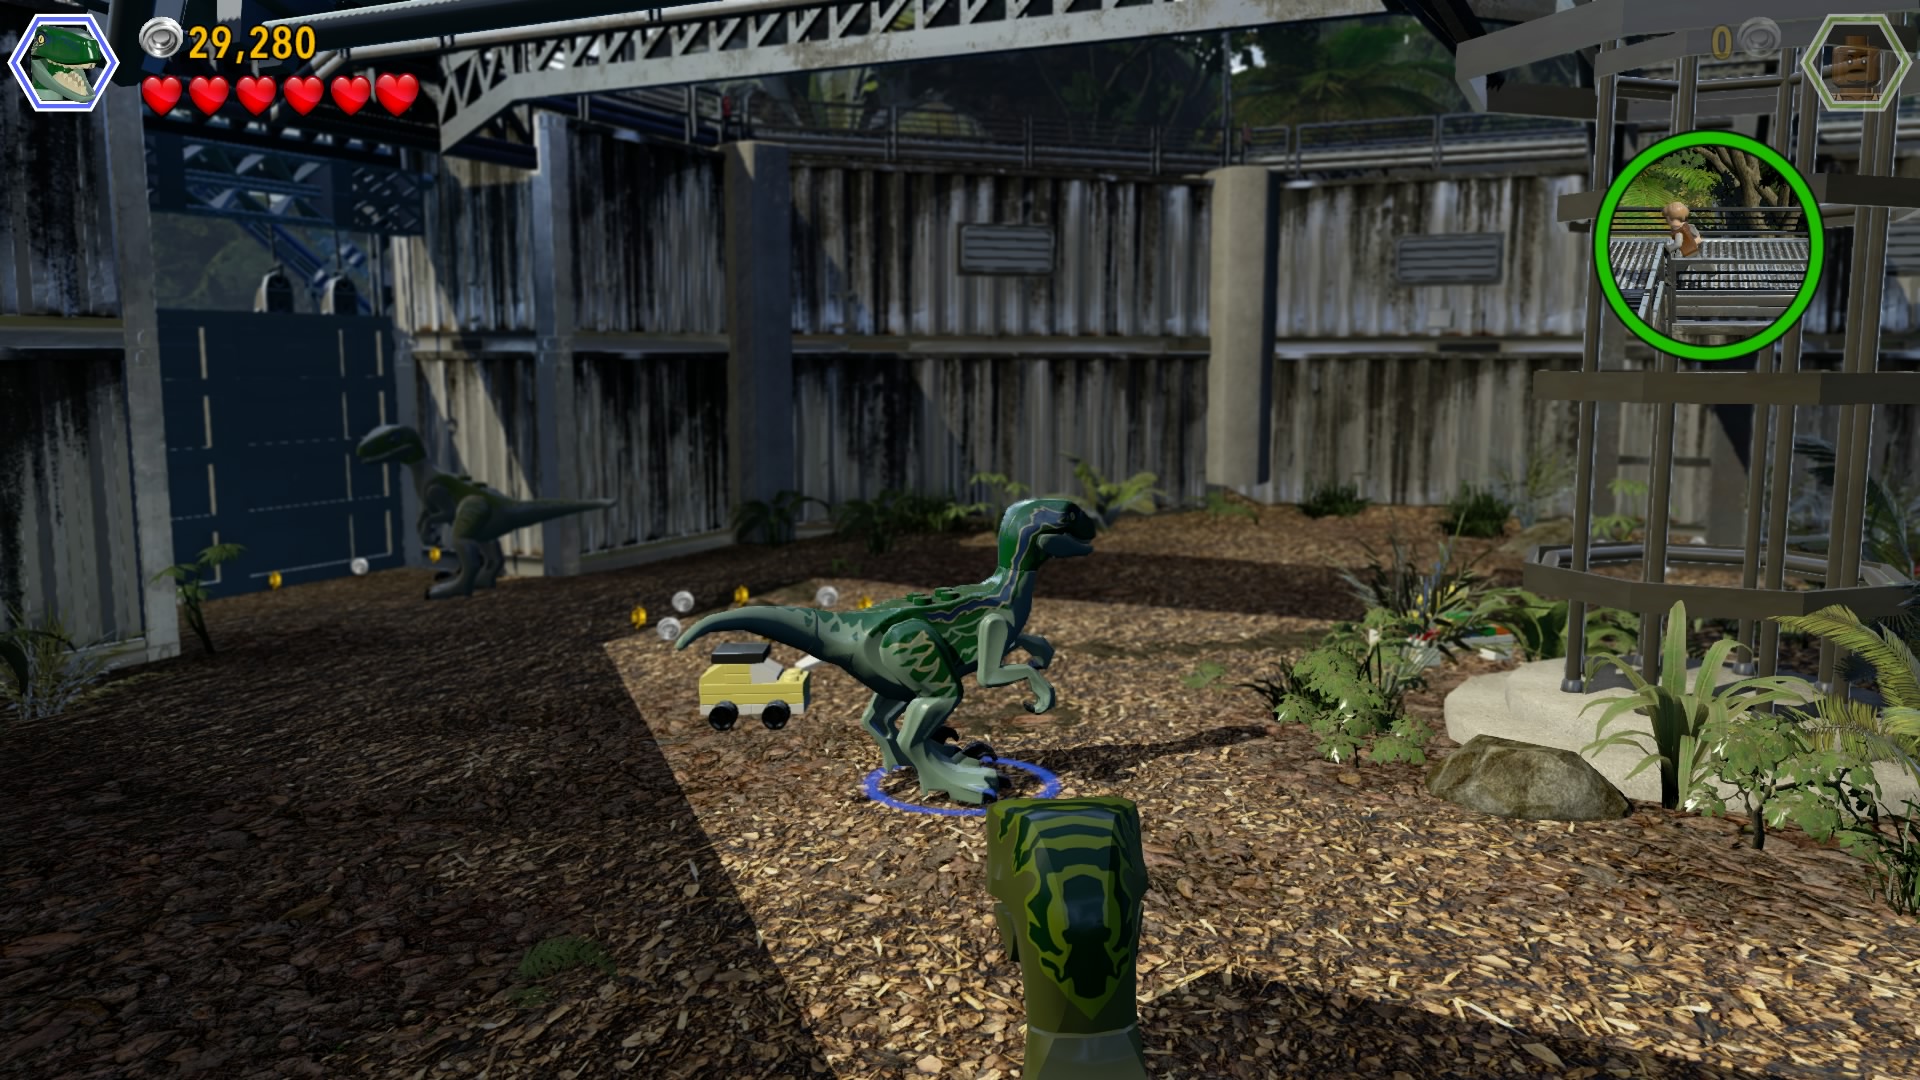 LEGO Jurassic World Review Gallery